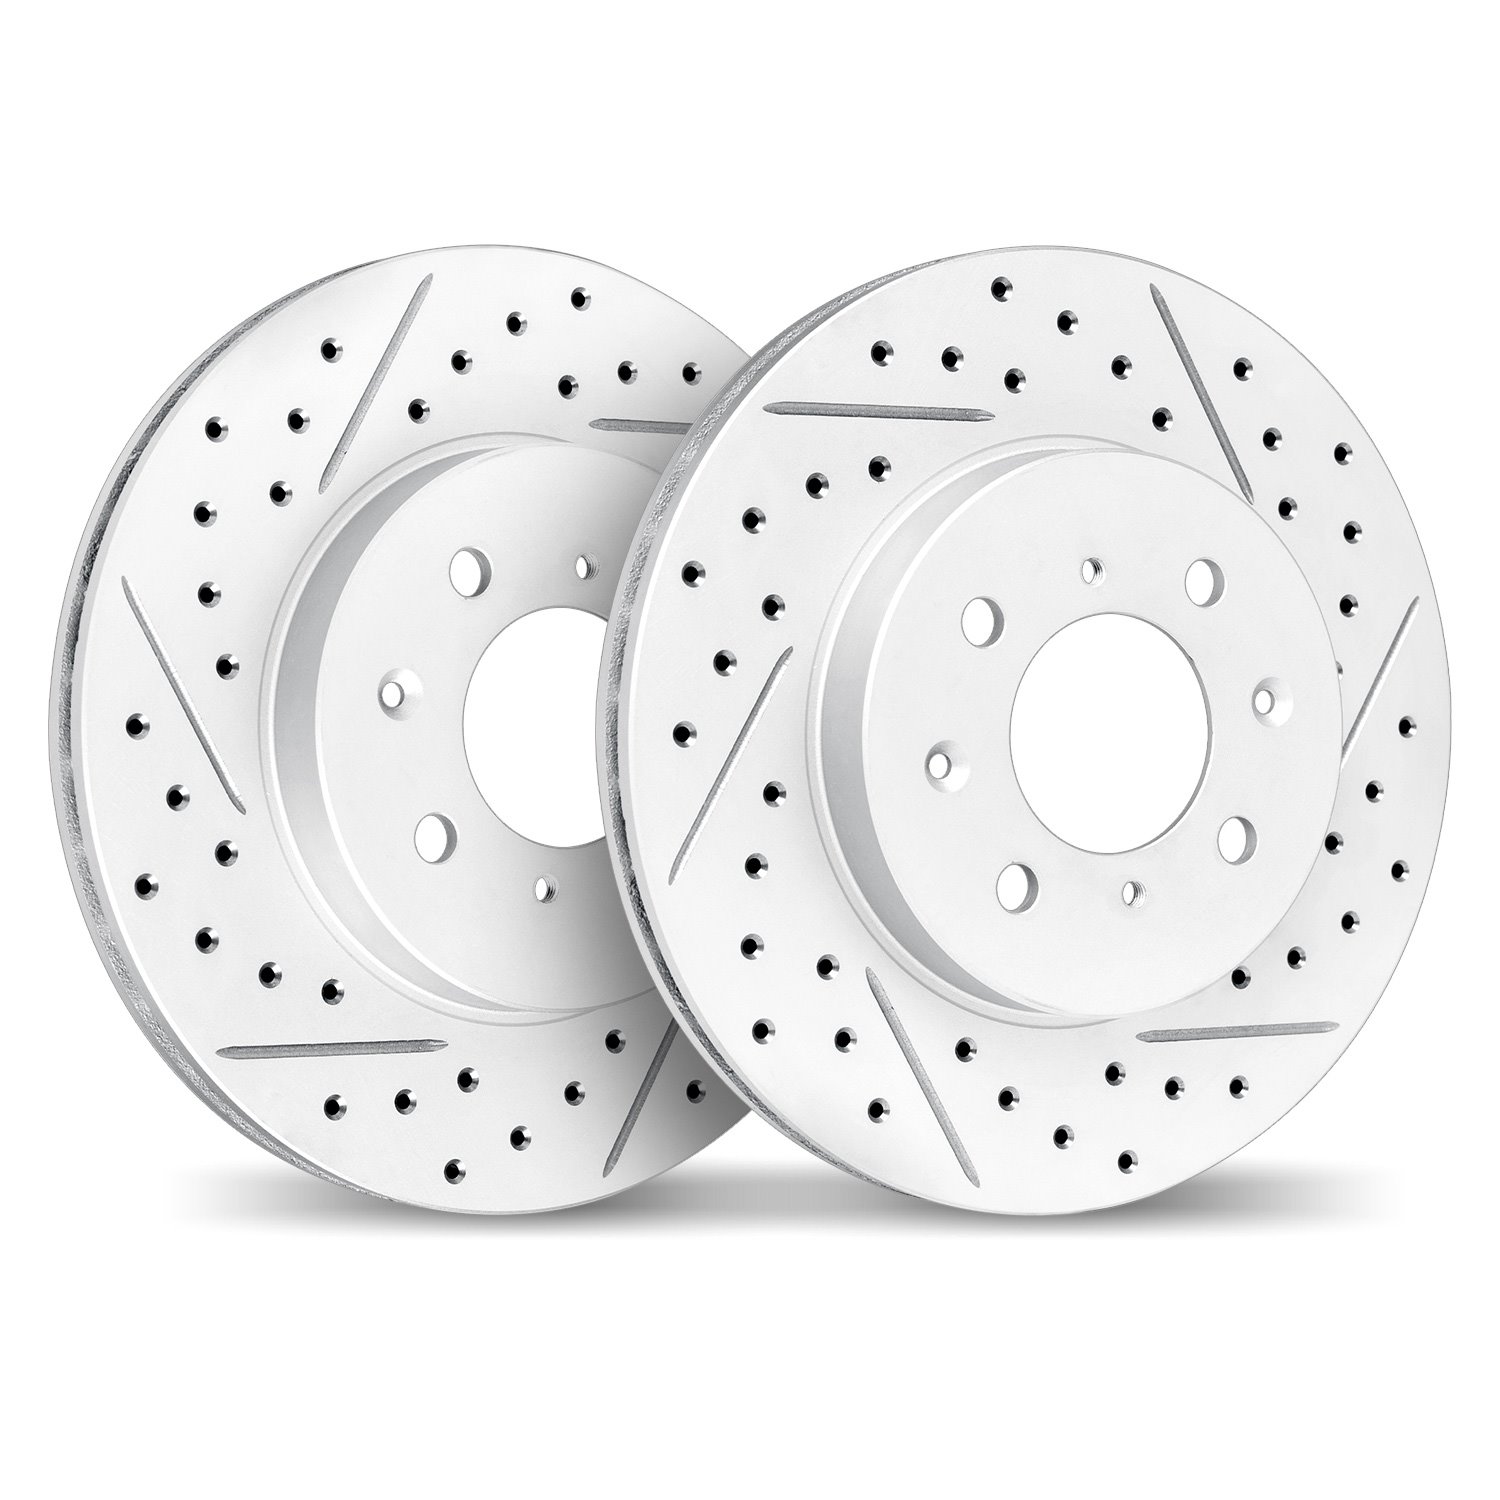 2002-58009 Geoperformance Drilled/Slotted Brake Rotors, 1992-1998 Acura/Honda, Position: Front